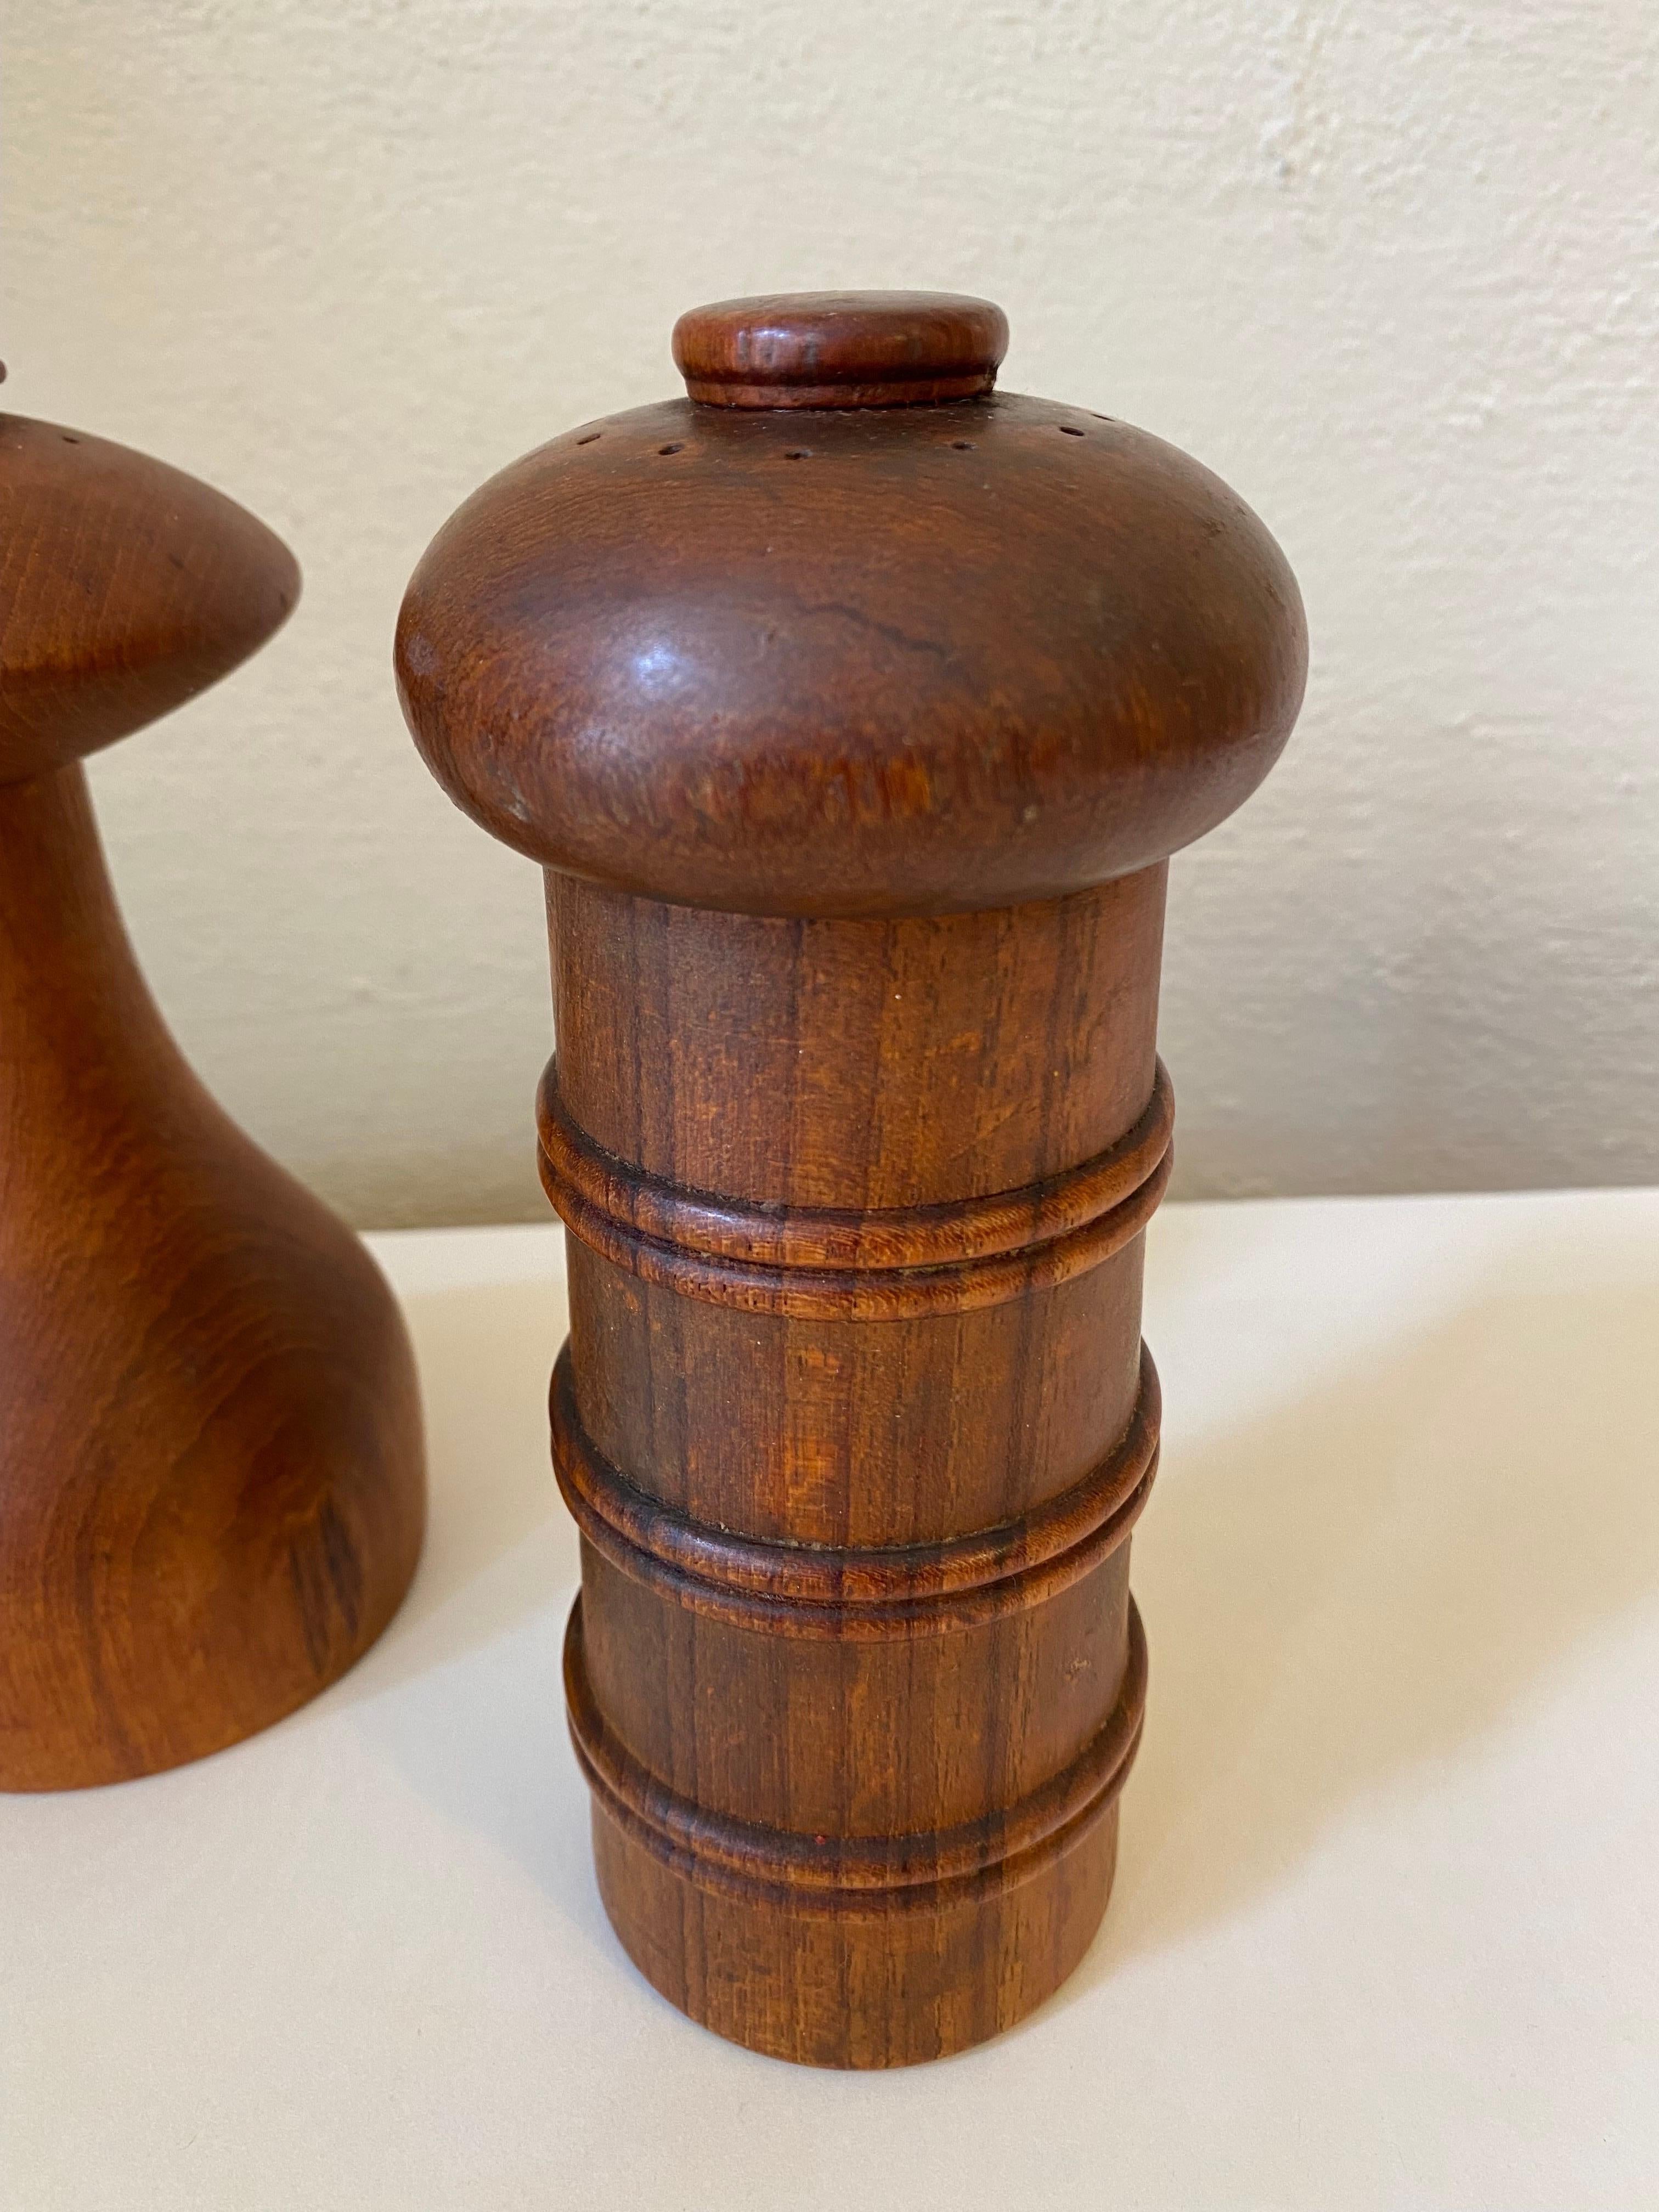 Jens Quistgaard for Dansk Teak peppermills, 2 different designs available. Priced individually.